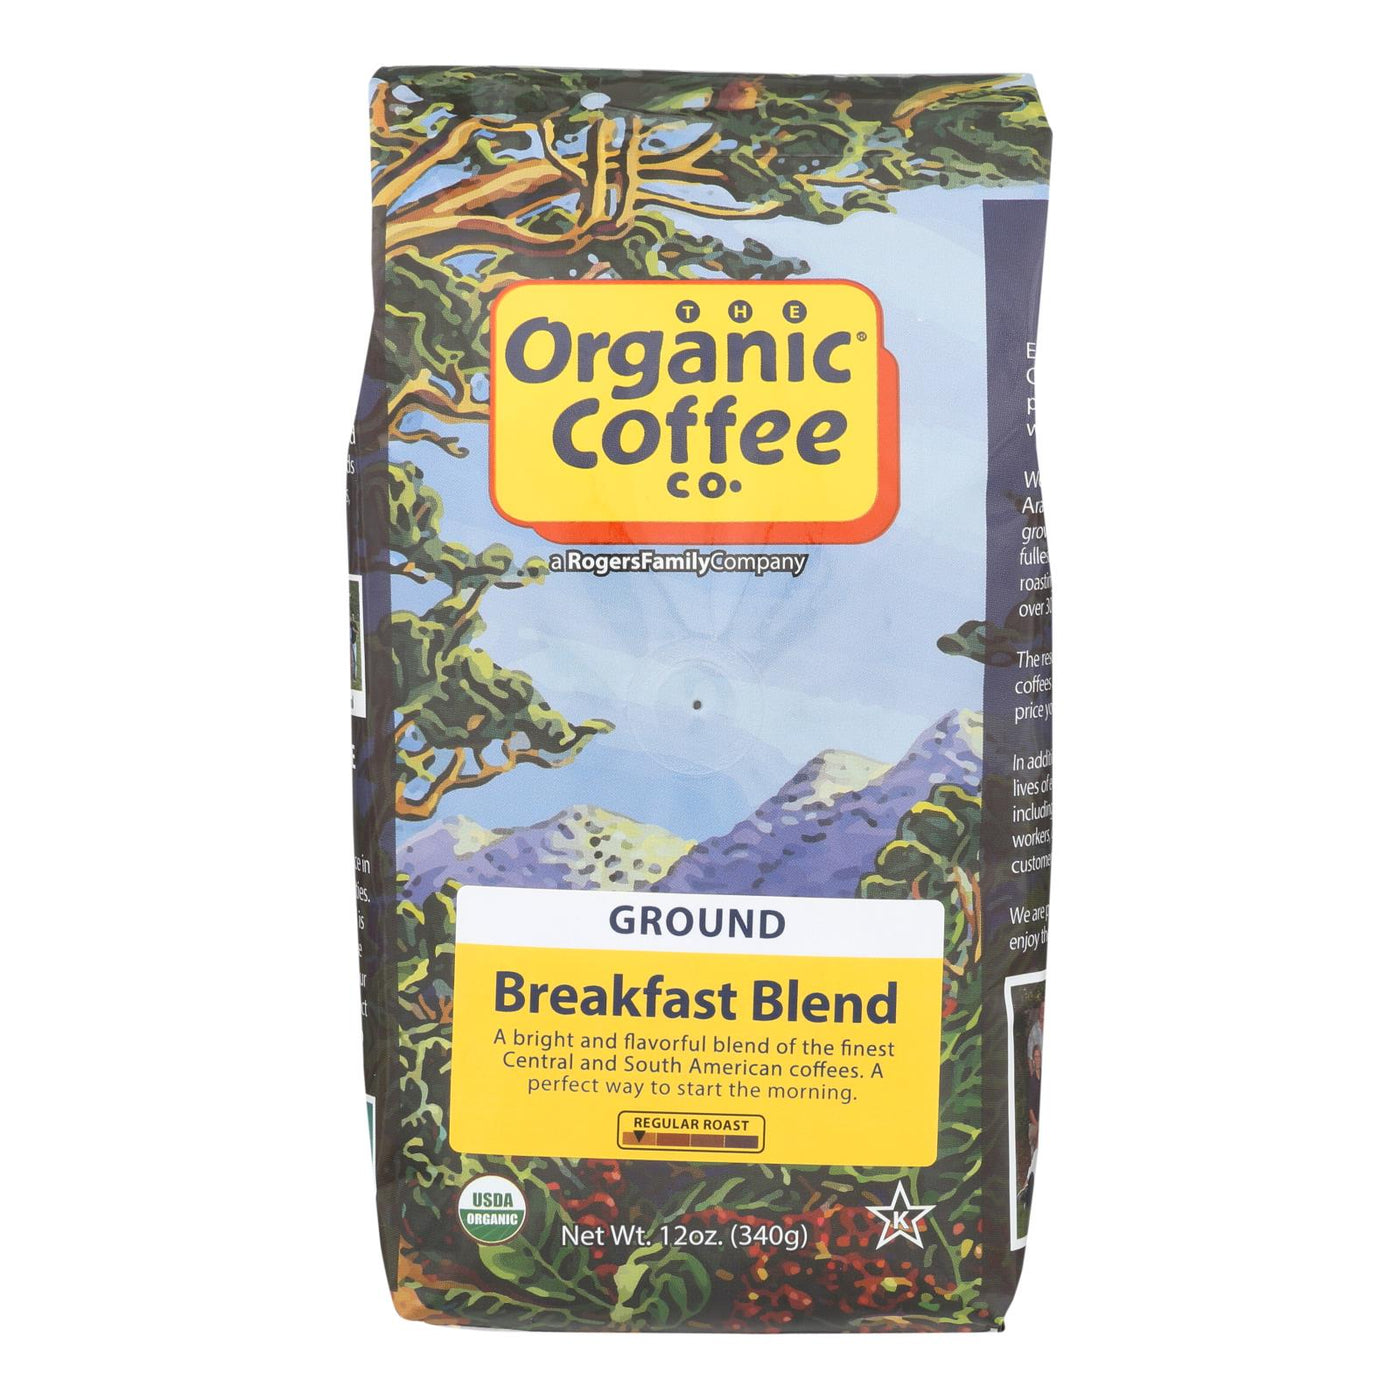 Organic Coffee Company Ground Coffee - Breakfast Blend - Case Of 6 - 12 Oz. | OnlyNaturals.us